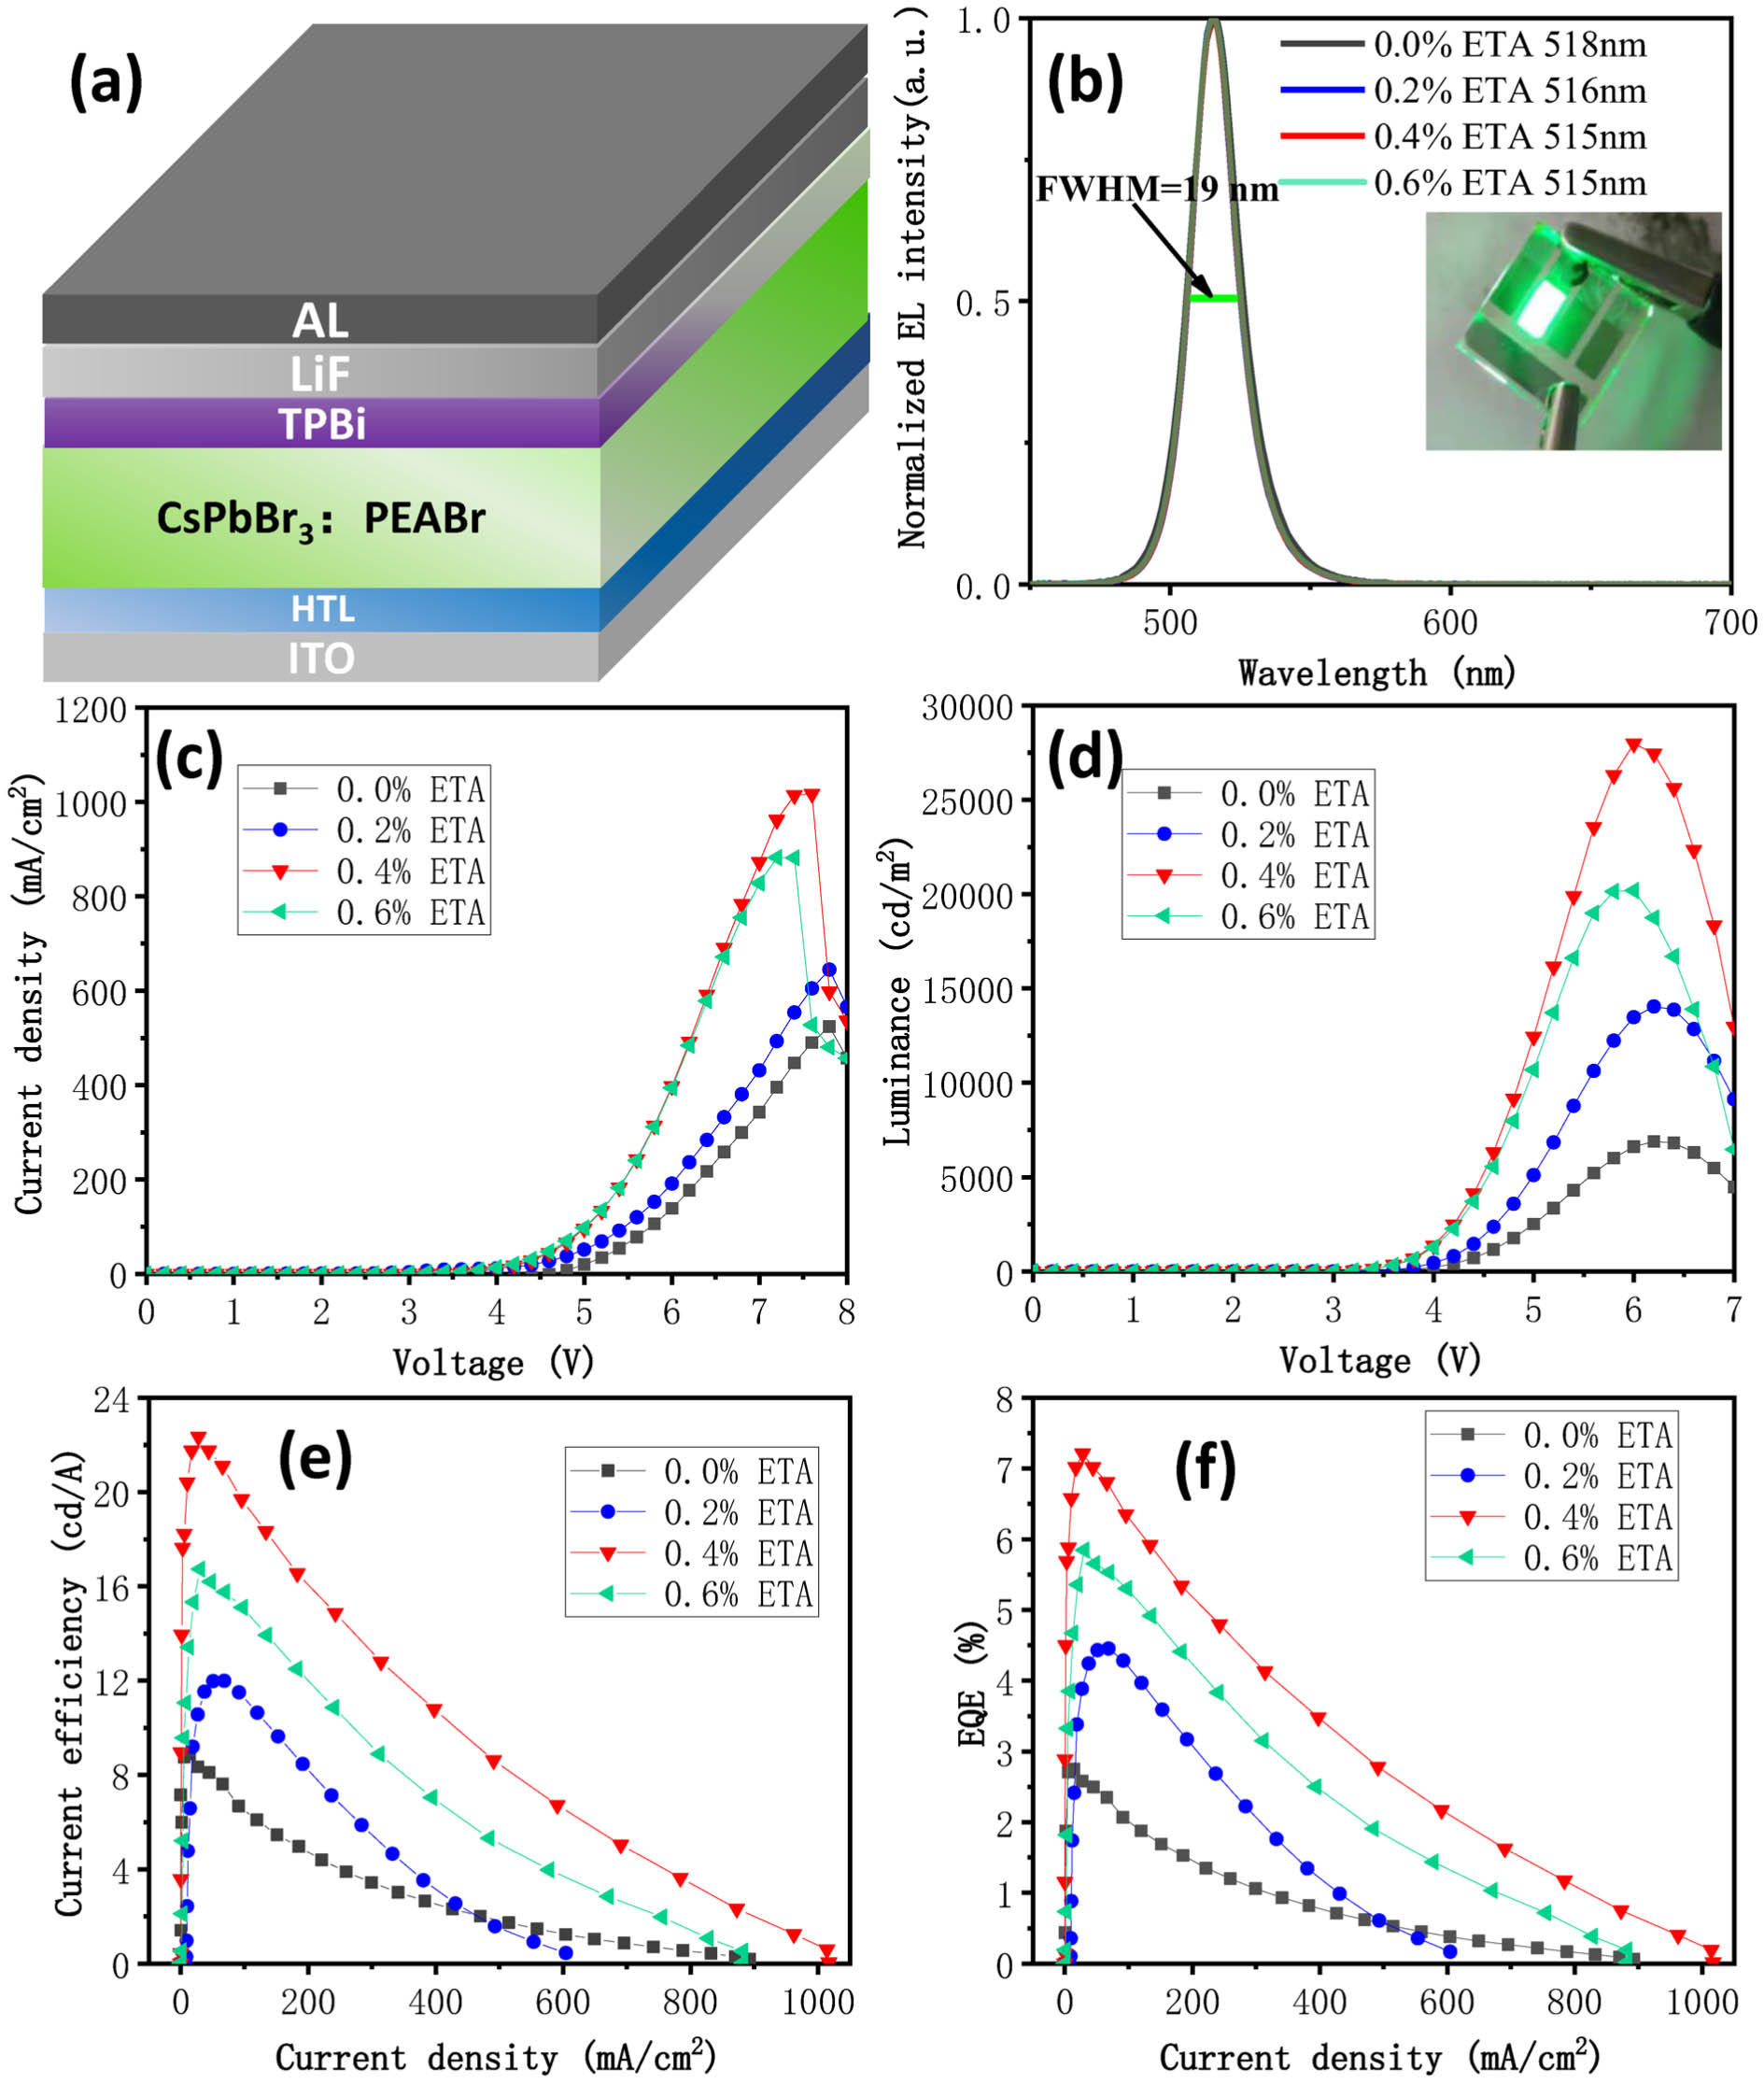 Device performance of PeLEDs fabricated on ITO-glass with various ETA ratios in PEDOT:PSS. (a) Device structure of the PeLED. (b) EL spectrum for the PeLED with CsPbBr3 as the EML. (c) J-V and (d) L-V characteristics. (e) CE as a function of luminance. (f) EQE as a function of luminance.